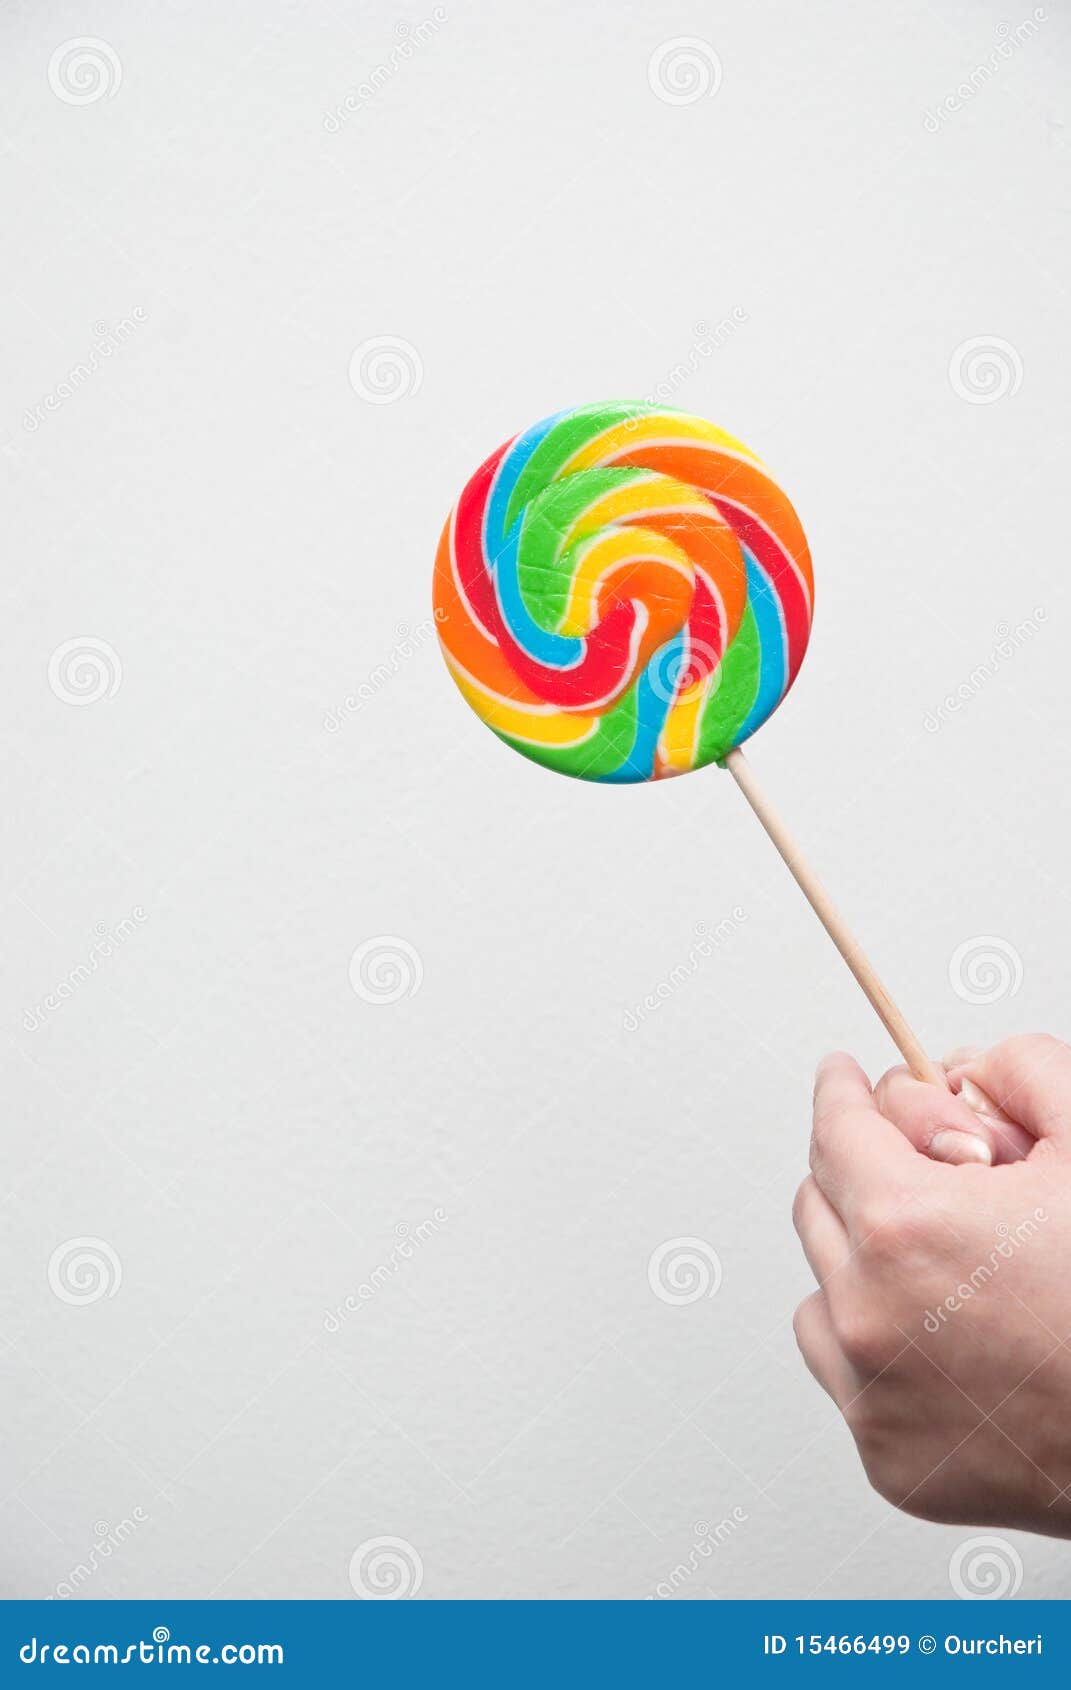 Candy lolly-pop stock image. Image of health, colorful - 15466499